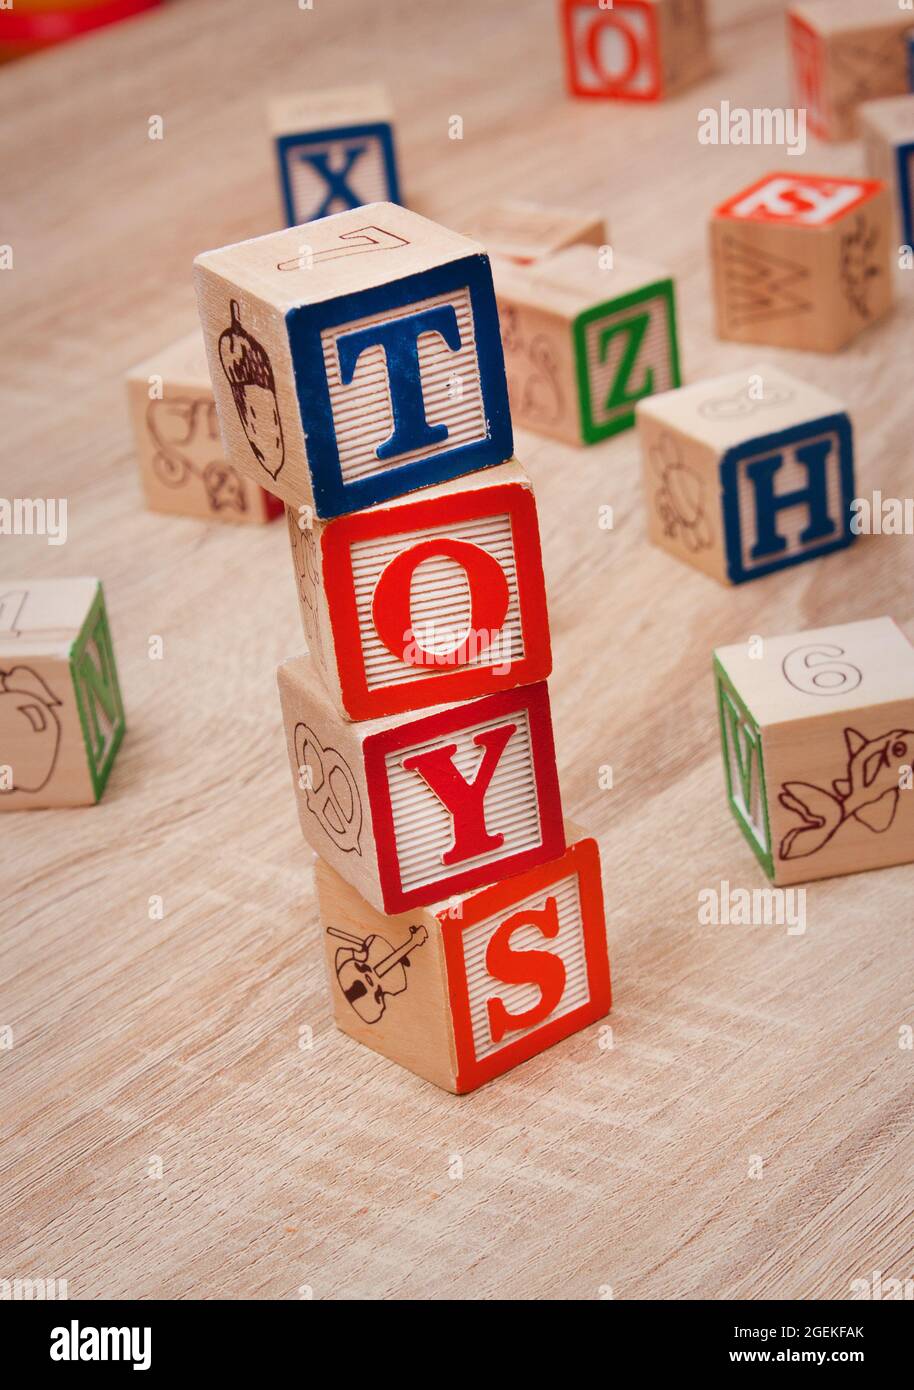 Toy blocks spelling out 'TOYS' Stock Photo